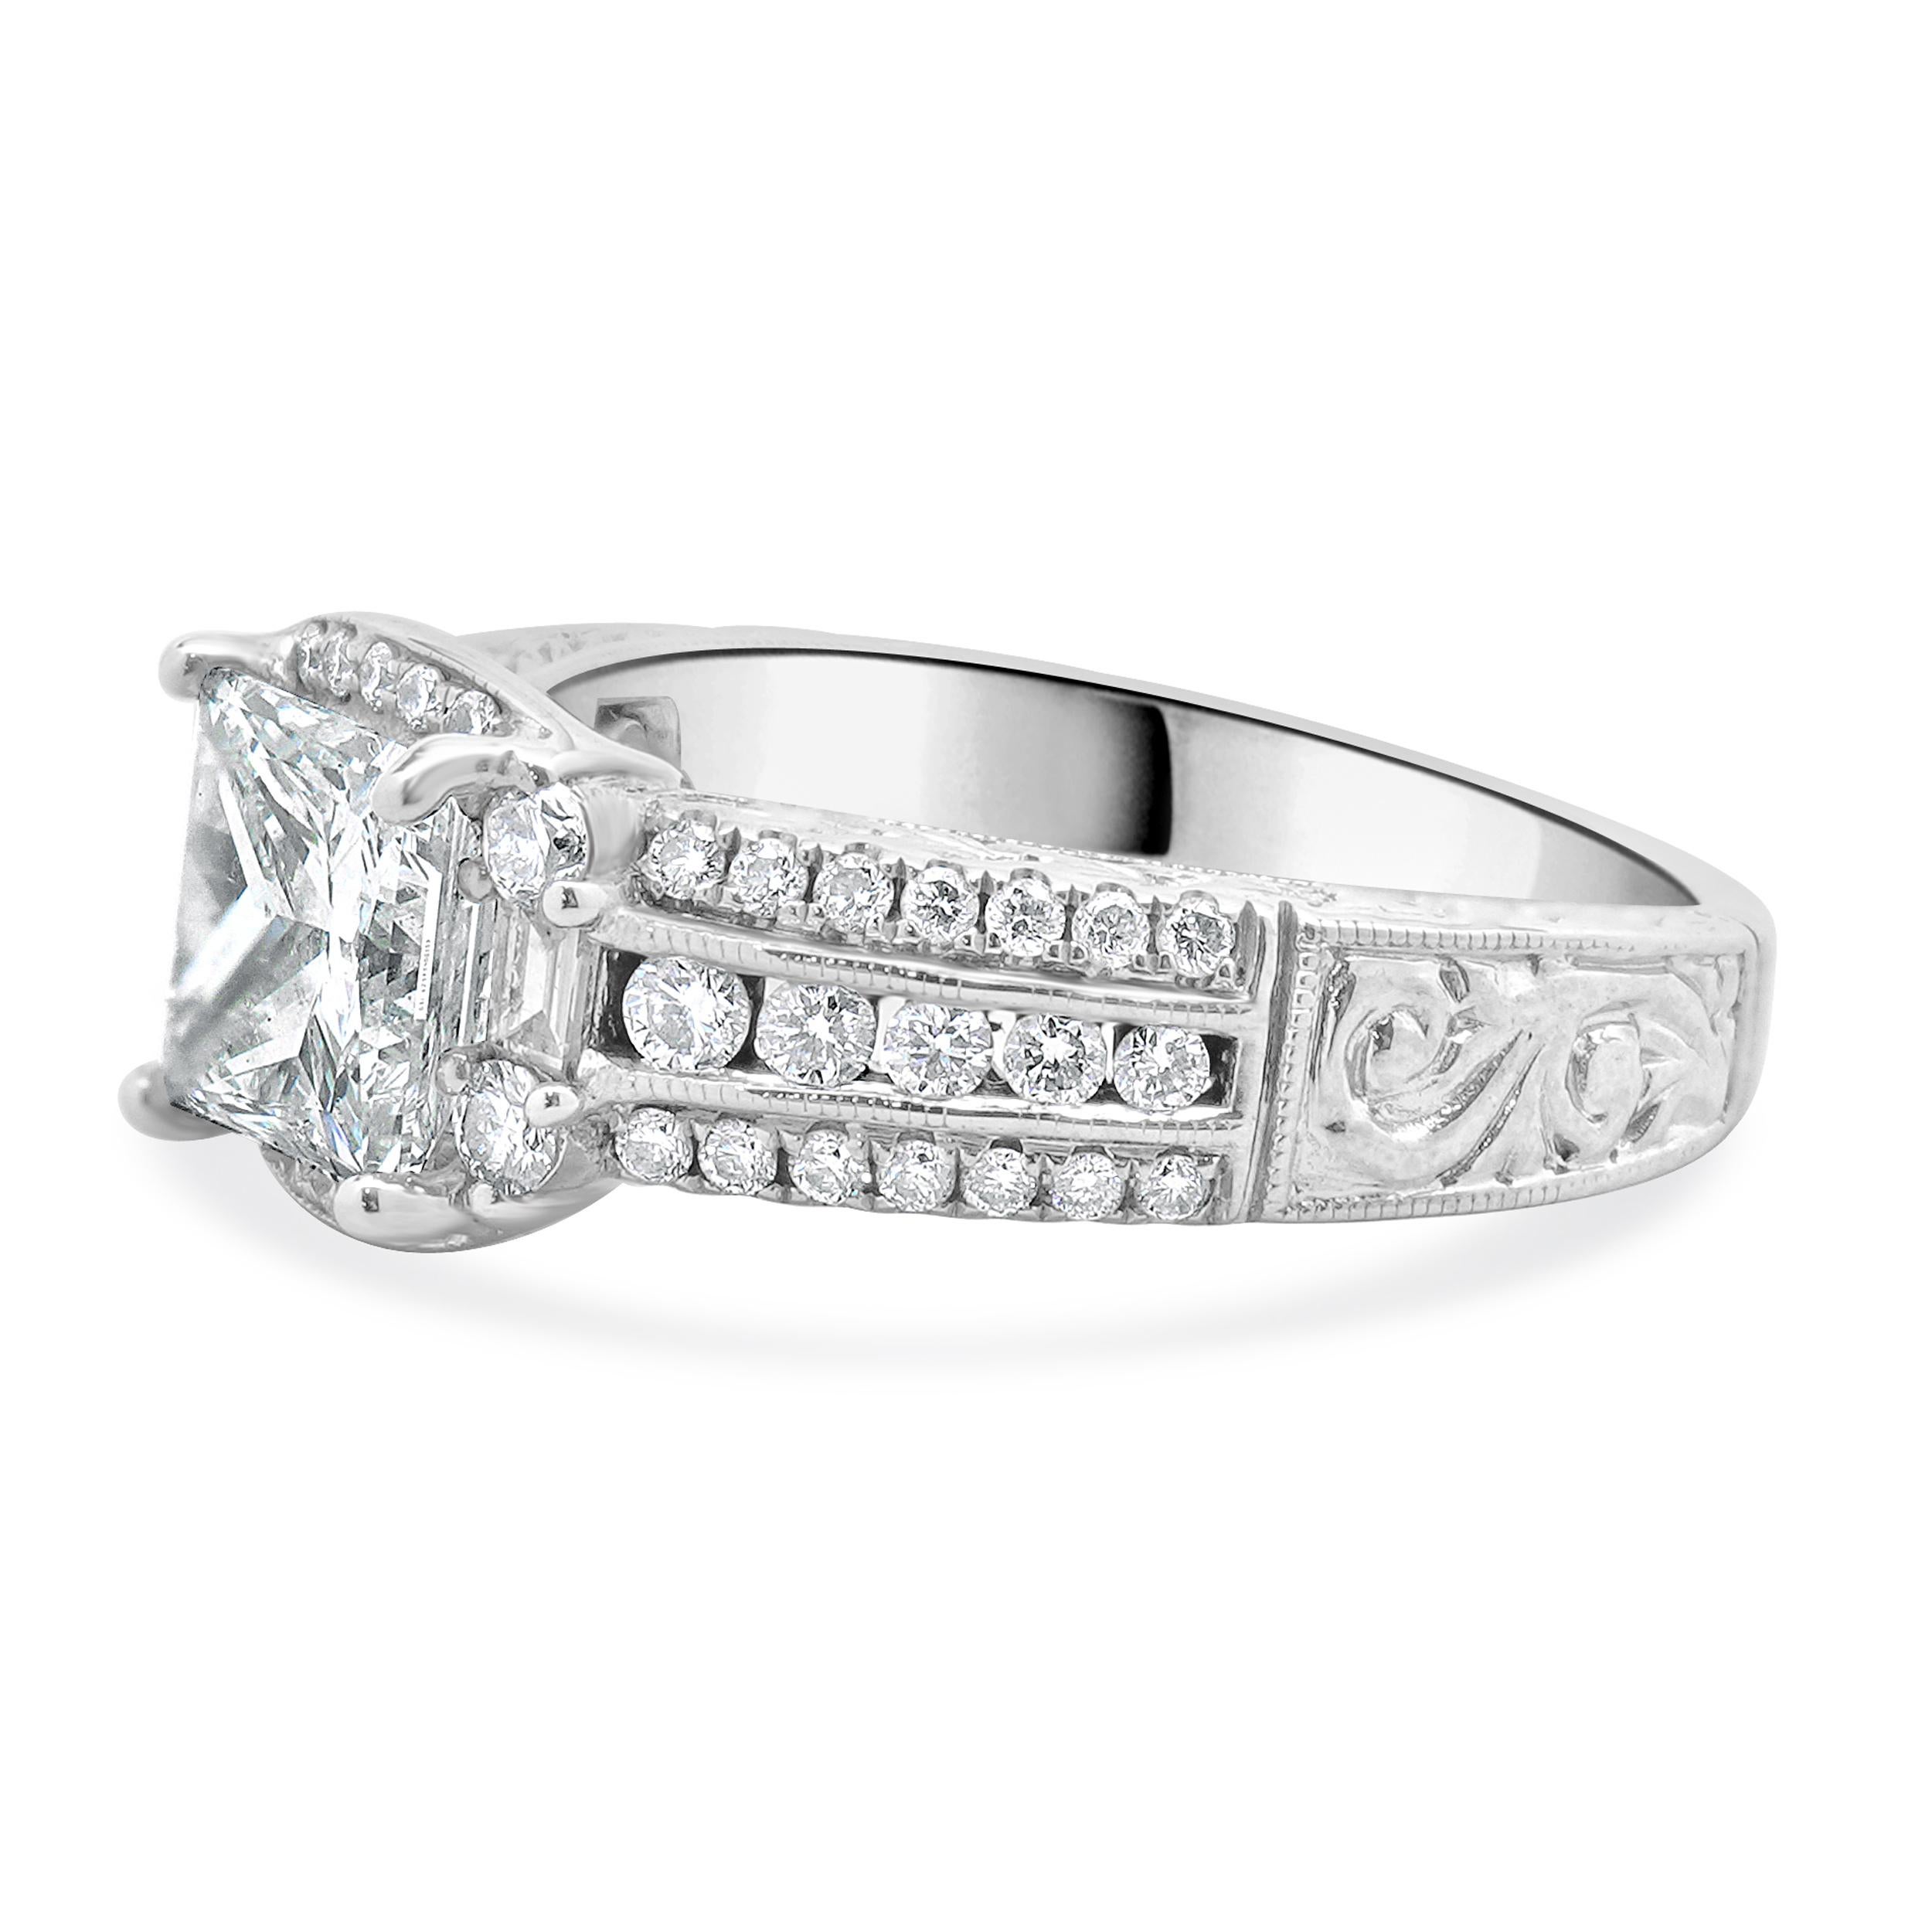 Designer: custom
Material: 14K white gold
Diamond: 1 princess cut = 1.52ct
Color: G
Clarity: SI1
GSI: 62595400113
Diamond: 52 round and baguette cut = 0.75cttw
Color: H
Clarity: SI2
Dimensions: ring top measures 14.9mm wide
Ring Size: 6